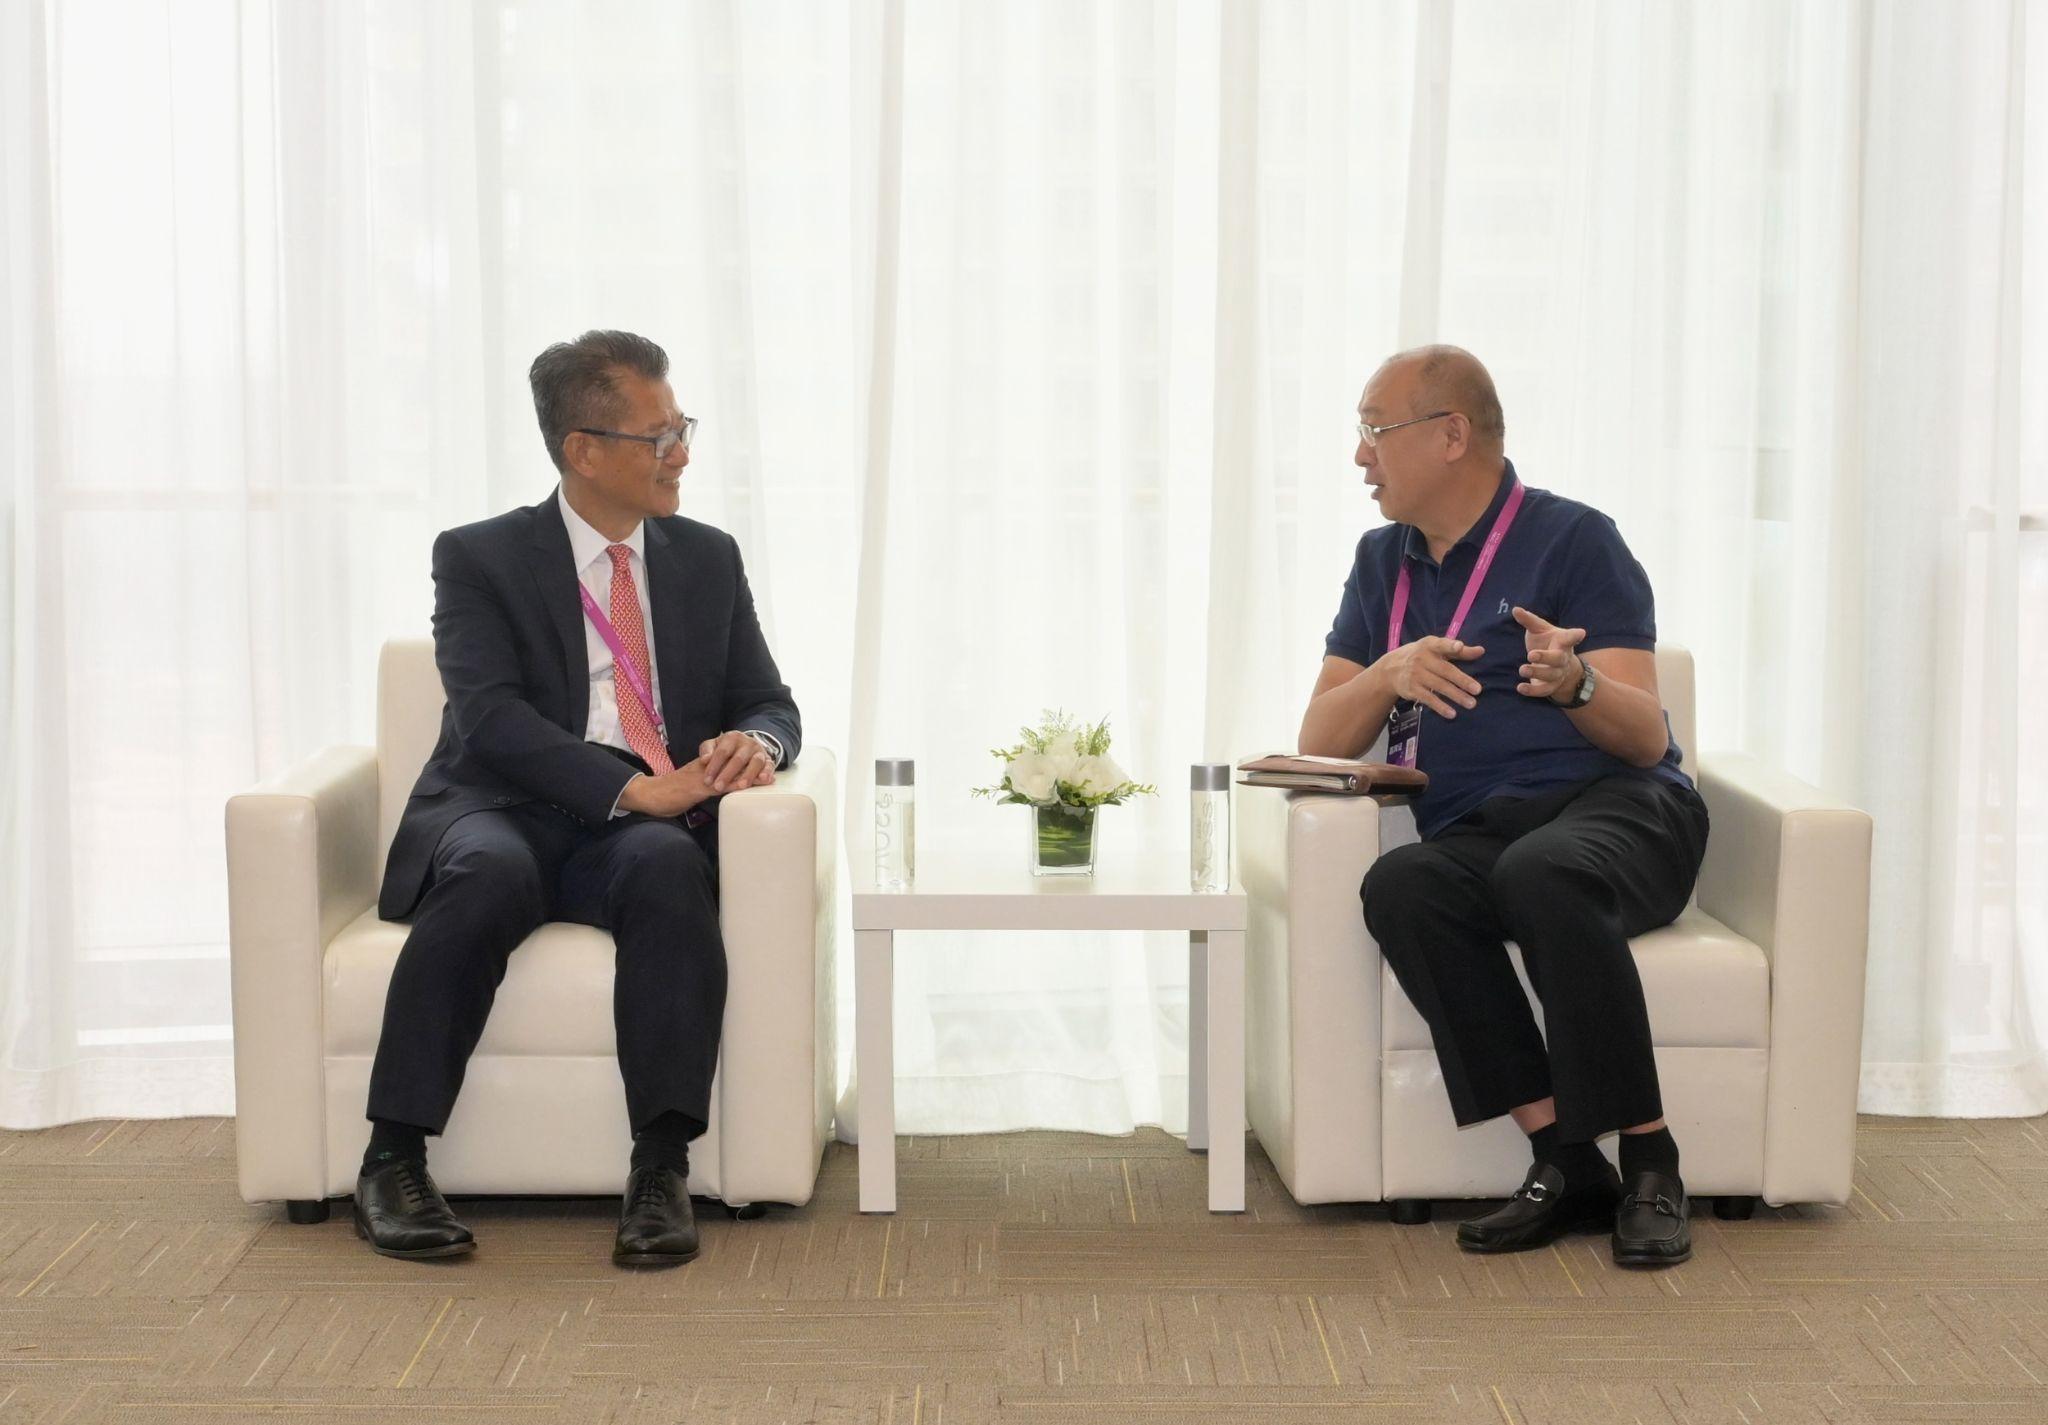 The Financial Secretary, Mr Paul Chan, continued his visit in Shanghai today (July 6). Photo shows Mr Chan (left) meeting with the Chief Executive Officer of the Shanghai Data Exchange, Mr Tang Qifeng (right).